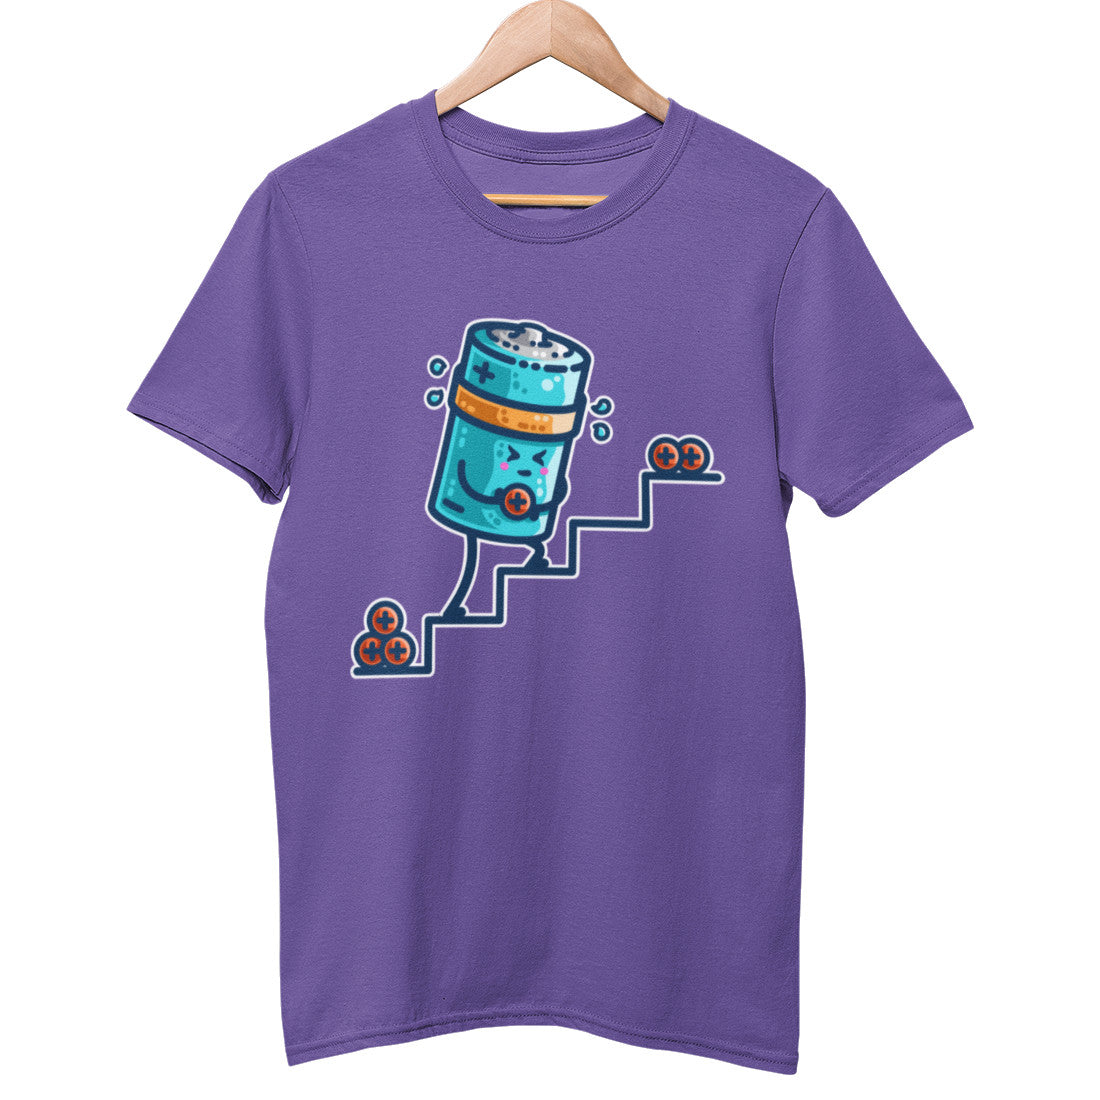 A purple unisex crewneck t-shirt on a hanger with a design on its chest of a kawaii cute blue cylindrical battery wearing an orange sweatband, with a facial expression of effort, moving positive charge up steps.